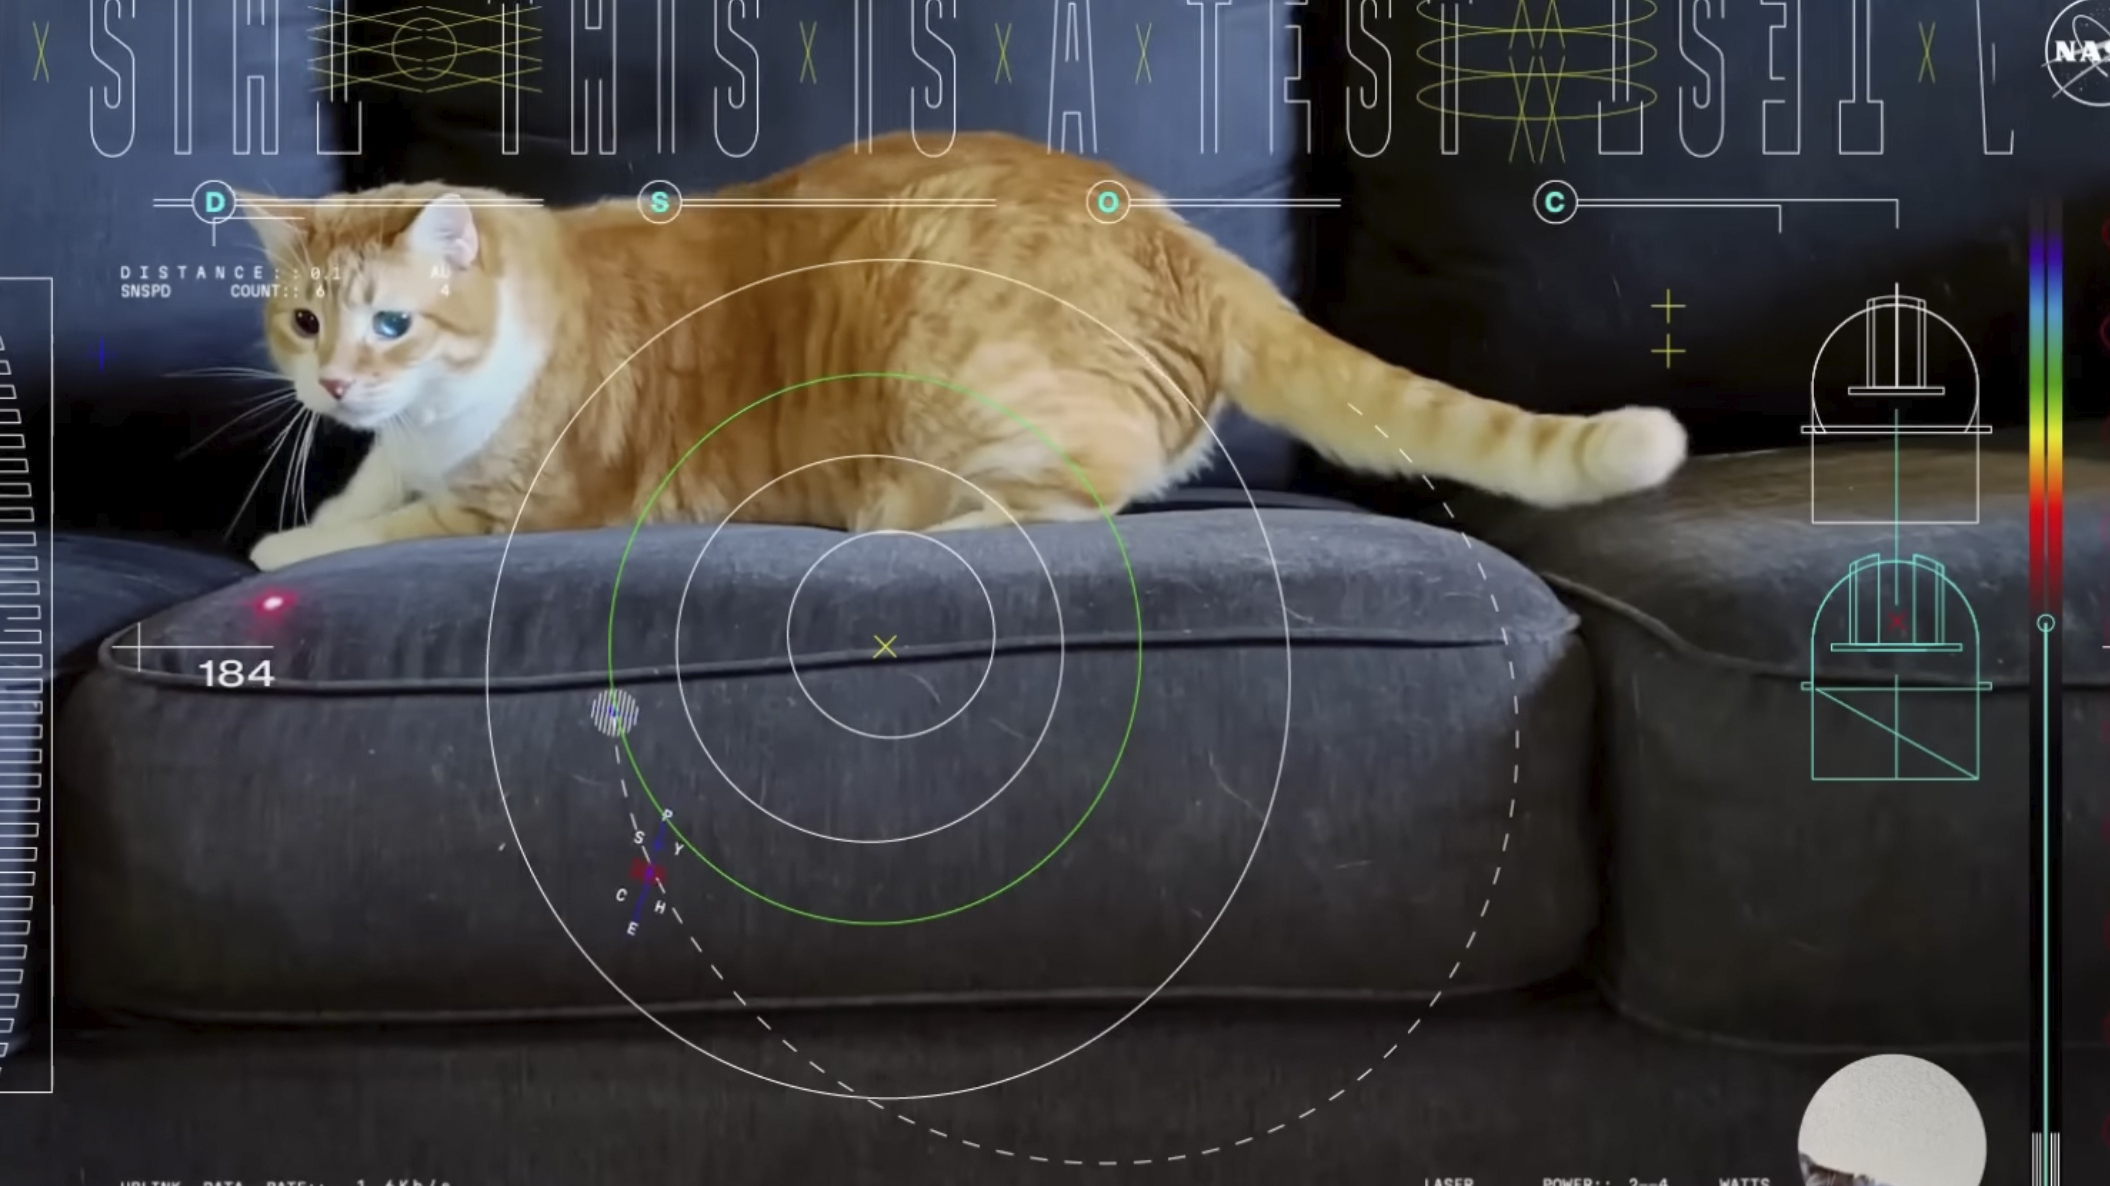 This cat video is out of this world, and NASA used a laser to beam it to Earth